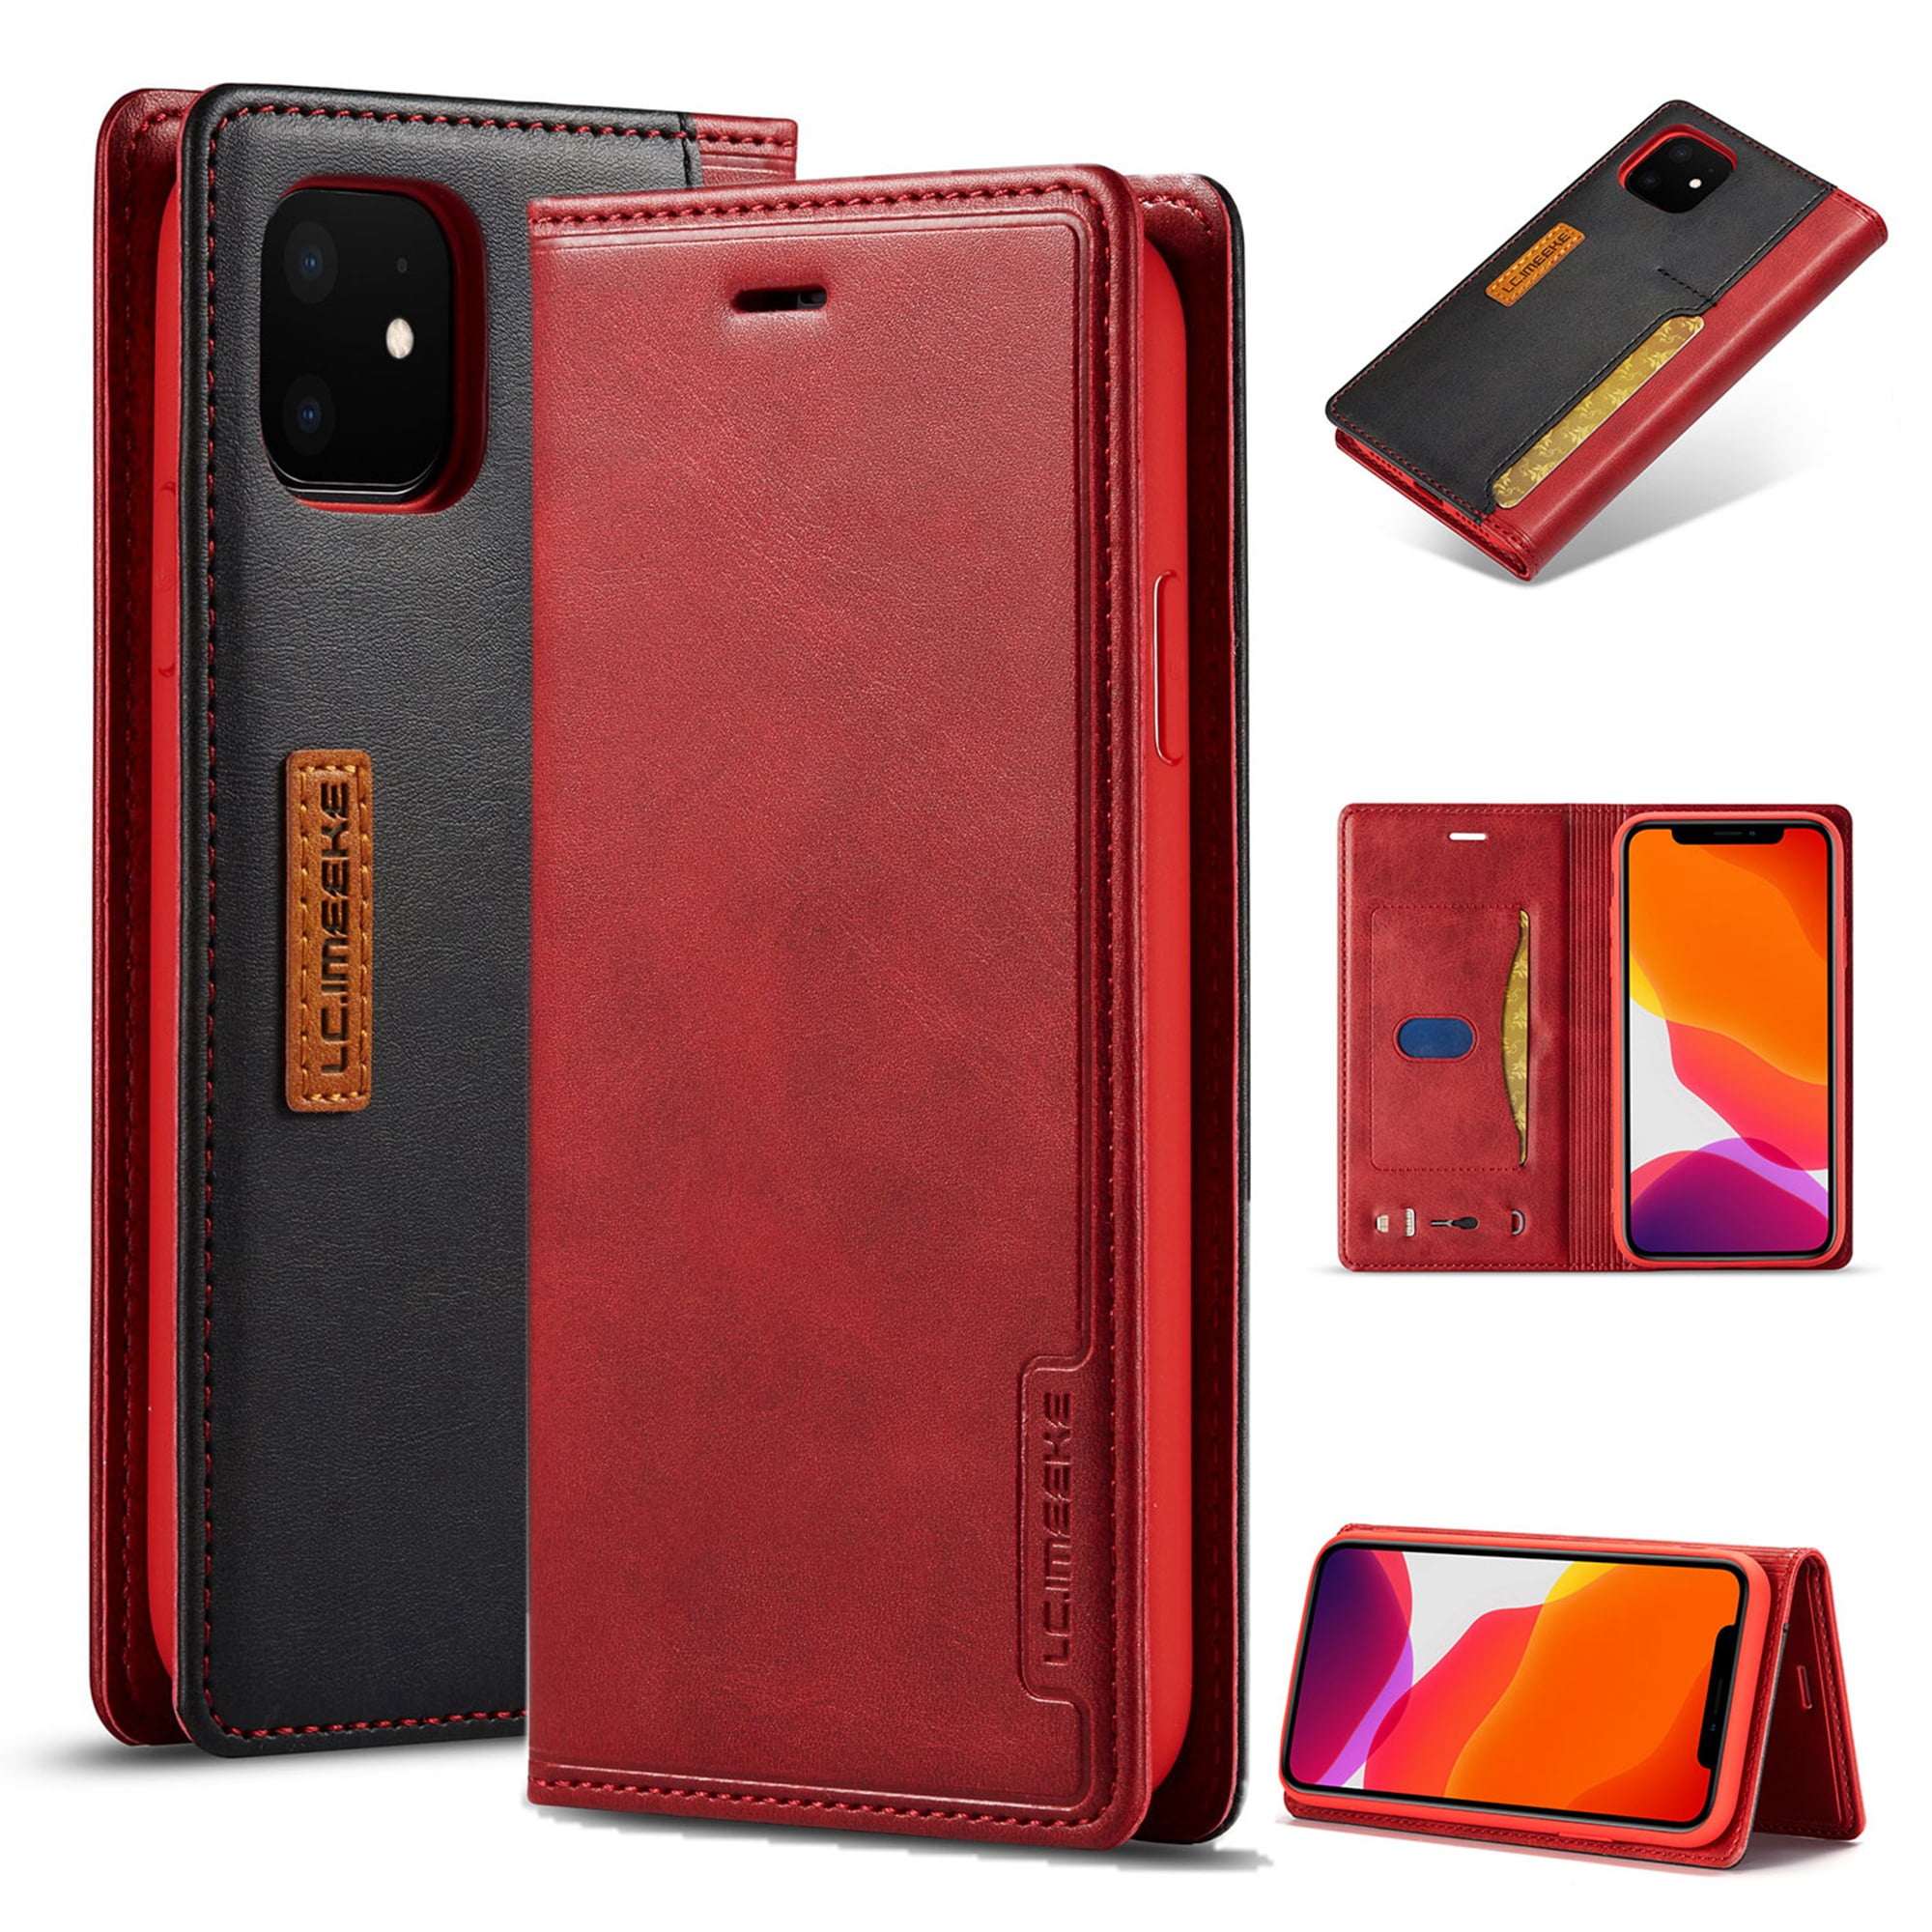 Shockproof PU Leather Flip Notebook Wallet Case with Magnetic Closure Kickstand Card Holder ID Slots Folio Slim Soft TPU Bumper Protective Skin Cover red Samsung Galaxy A30s Case 